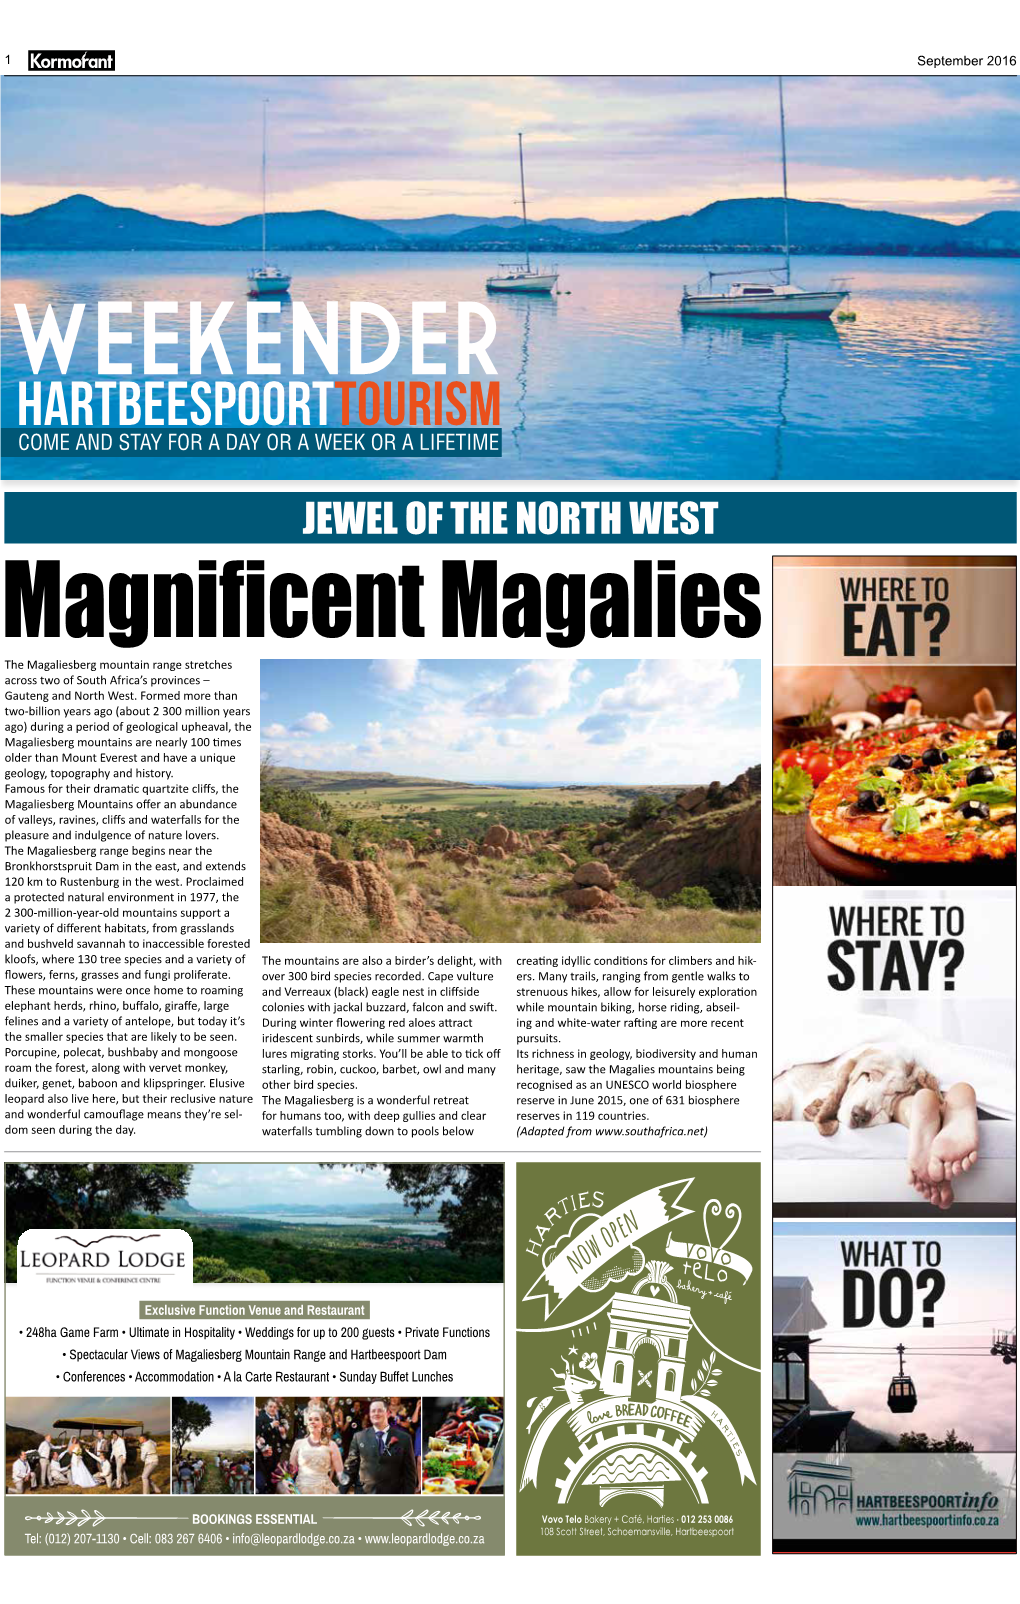 JEWEL of the NORTH WEST Magnificent Magalies the Magaliesberg Mountain Range Stretches Across Two of South Africa’S Provinces – Gauteng and North West